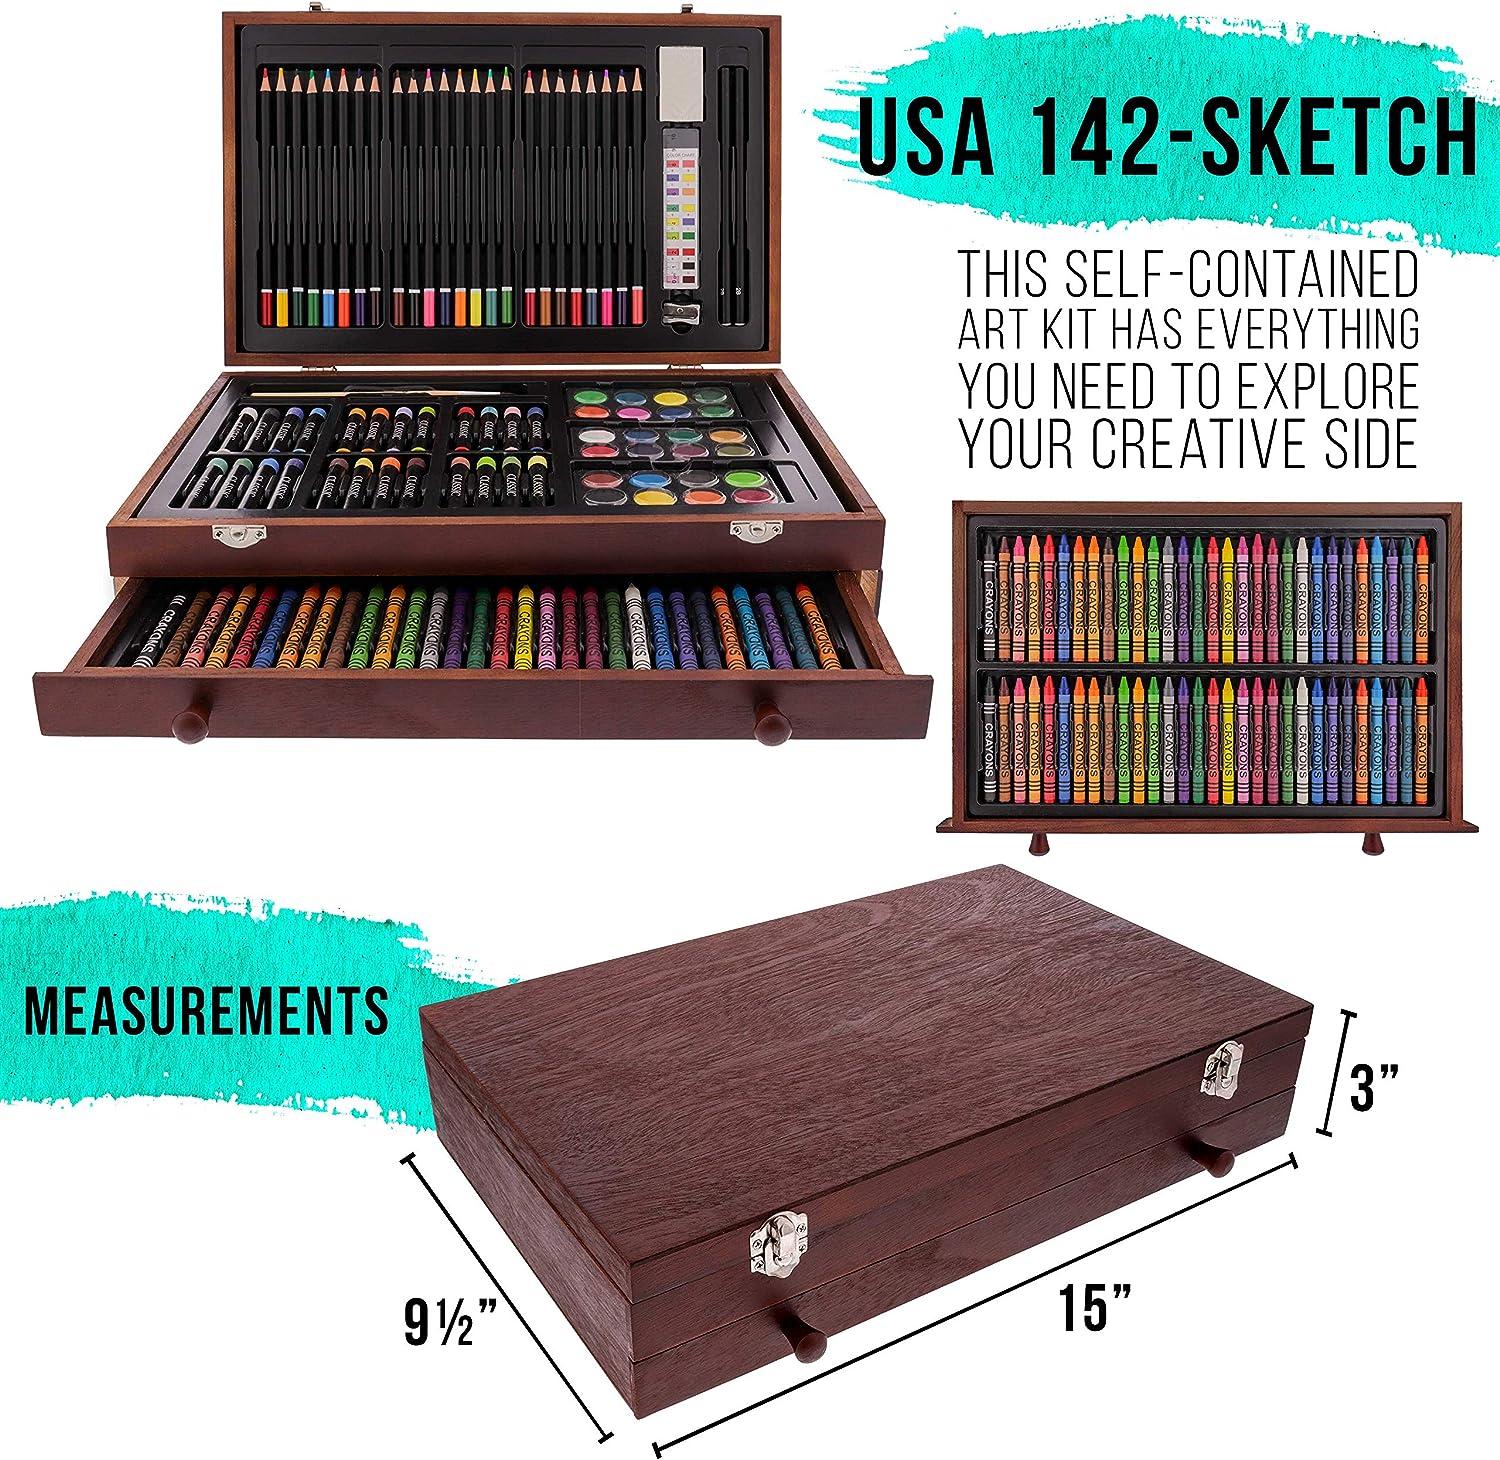  US Art Supply 136-Piece Deluxe Watercolor Painting & Sketch  Drawing Set with Wood Drawer Table Easel - Colored Pencils, Watercolor Paint,  Sketchbook, Drawing Paper Pads, Brushes, Pallete